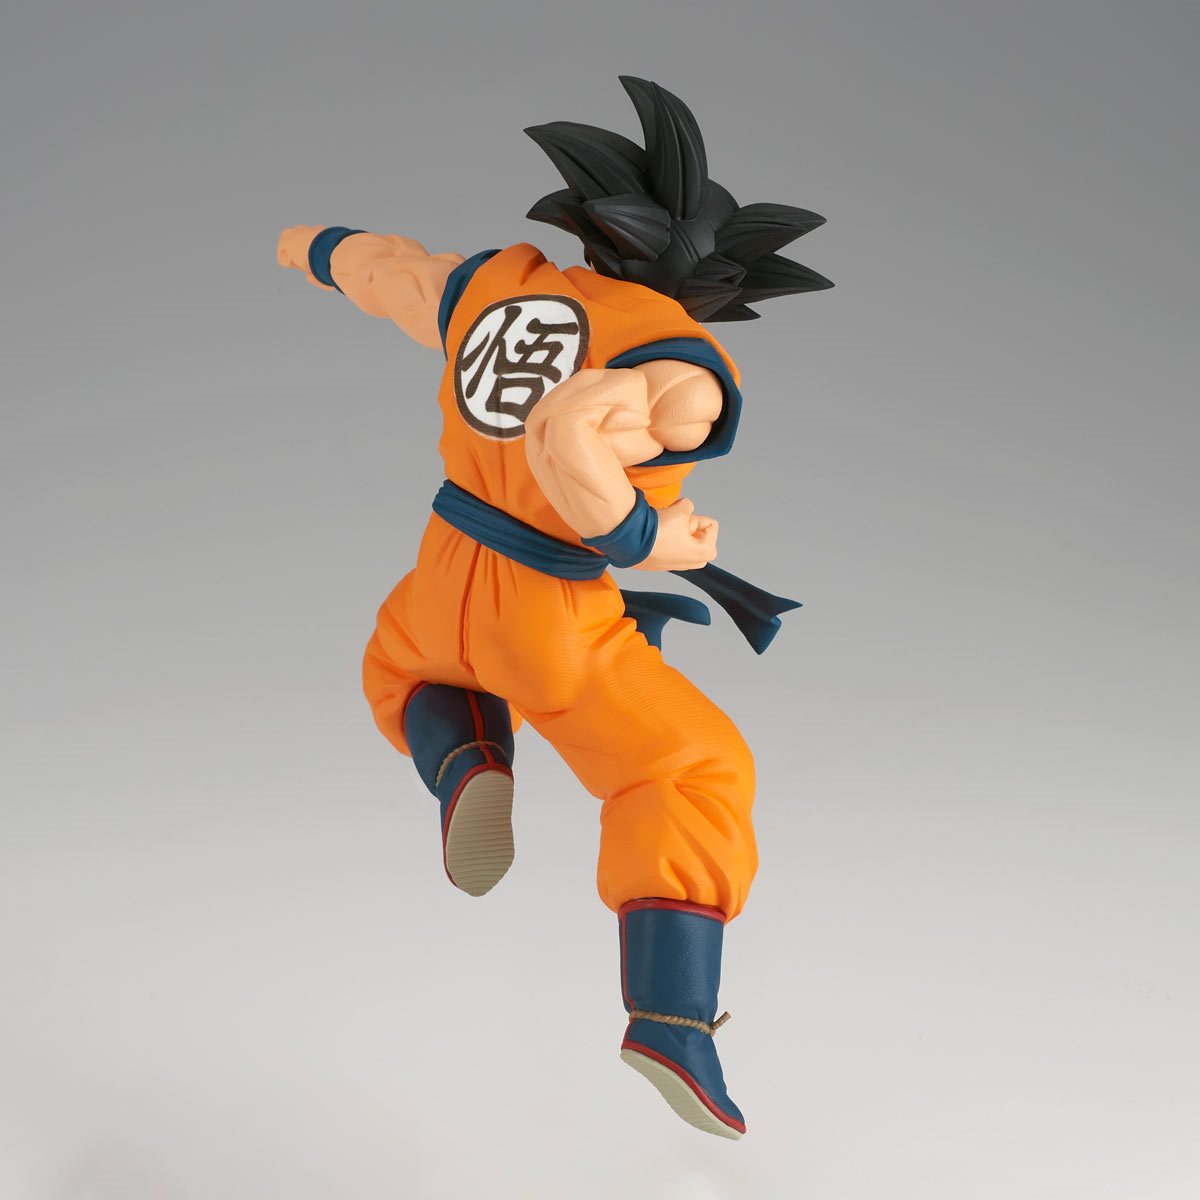 Uub (Dragon Ball Z) Match Makers Statue – Collector's Outpost